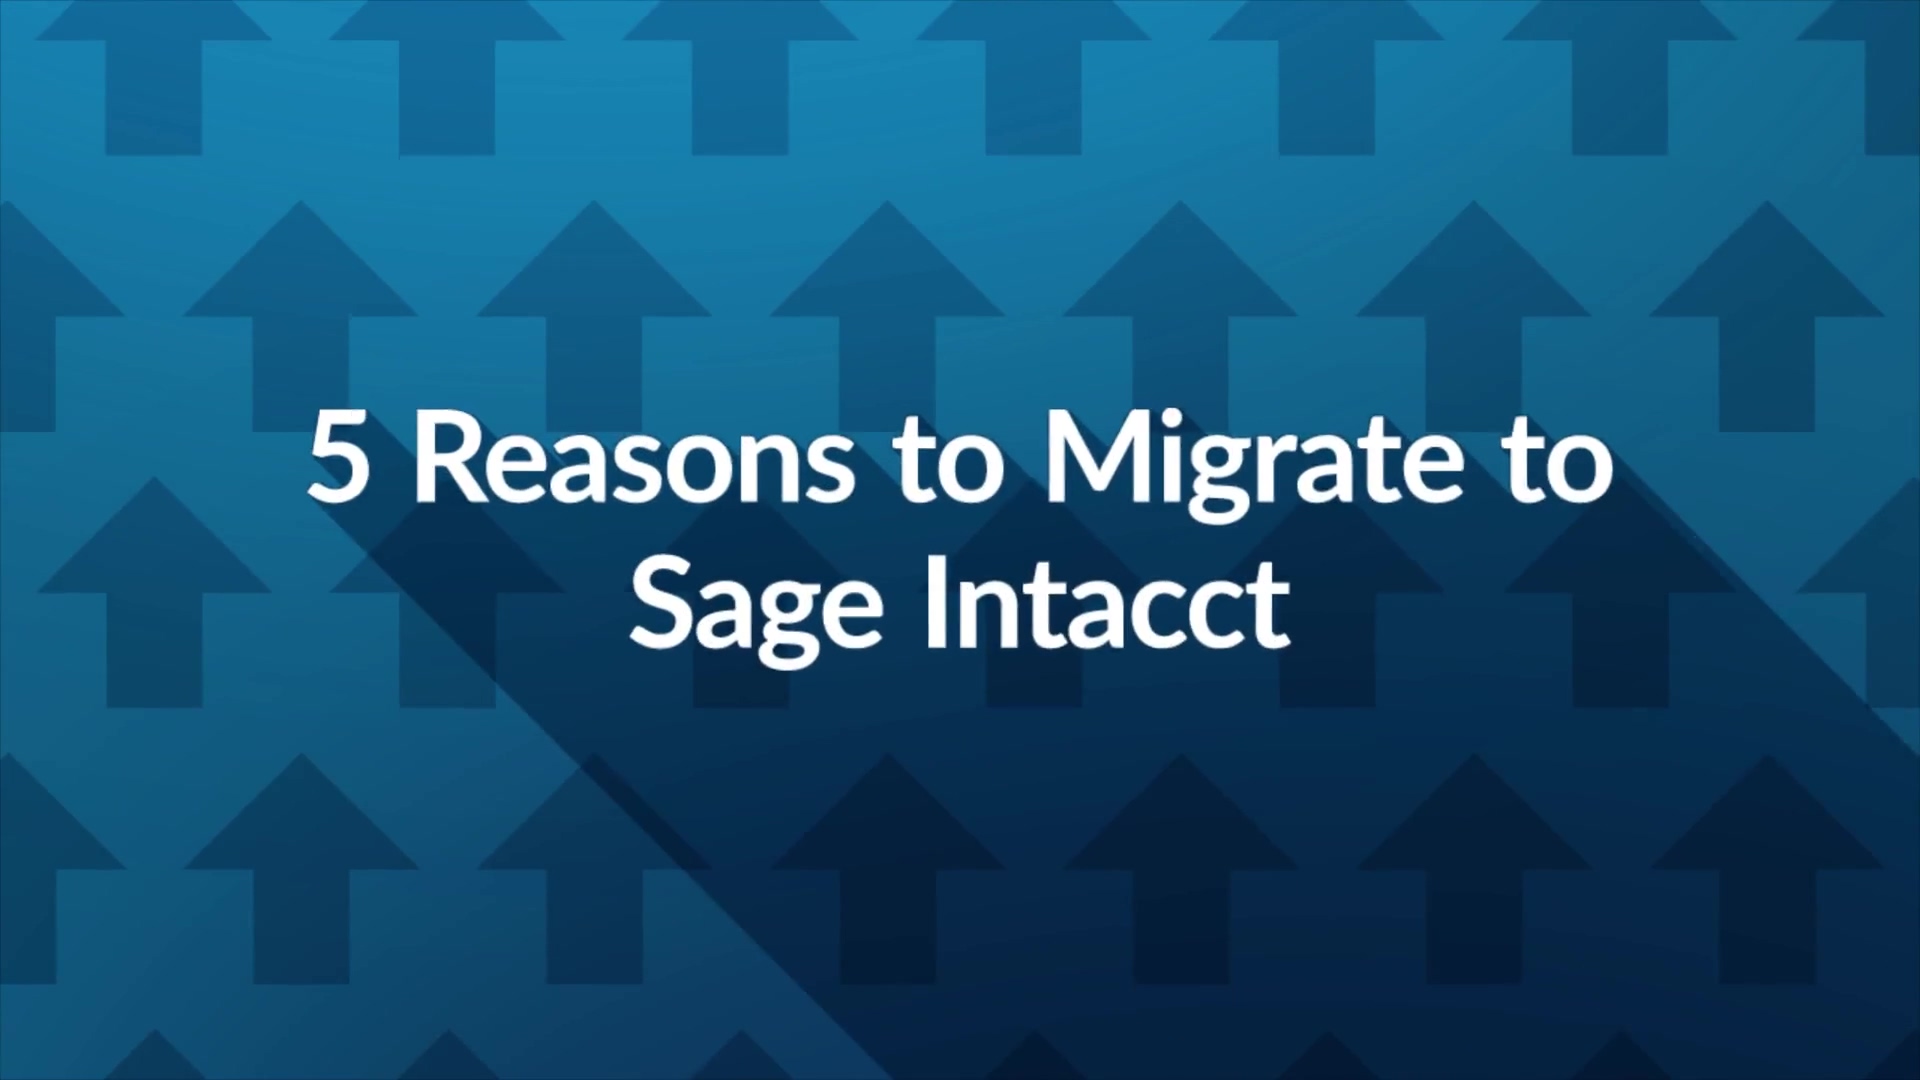 5-reasons-organizations-migrate-to-intacct